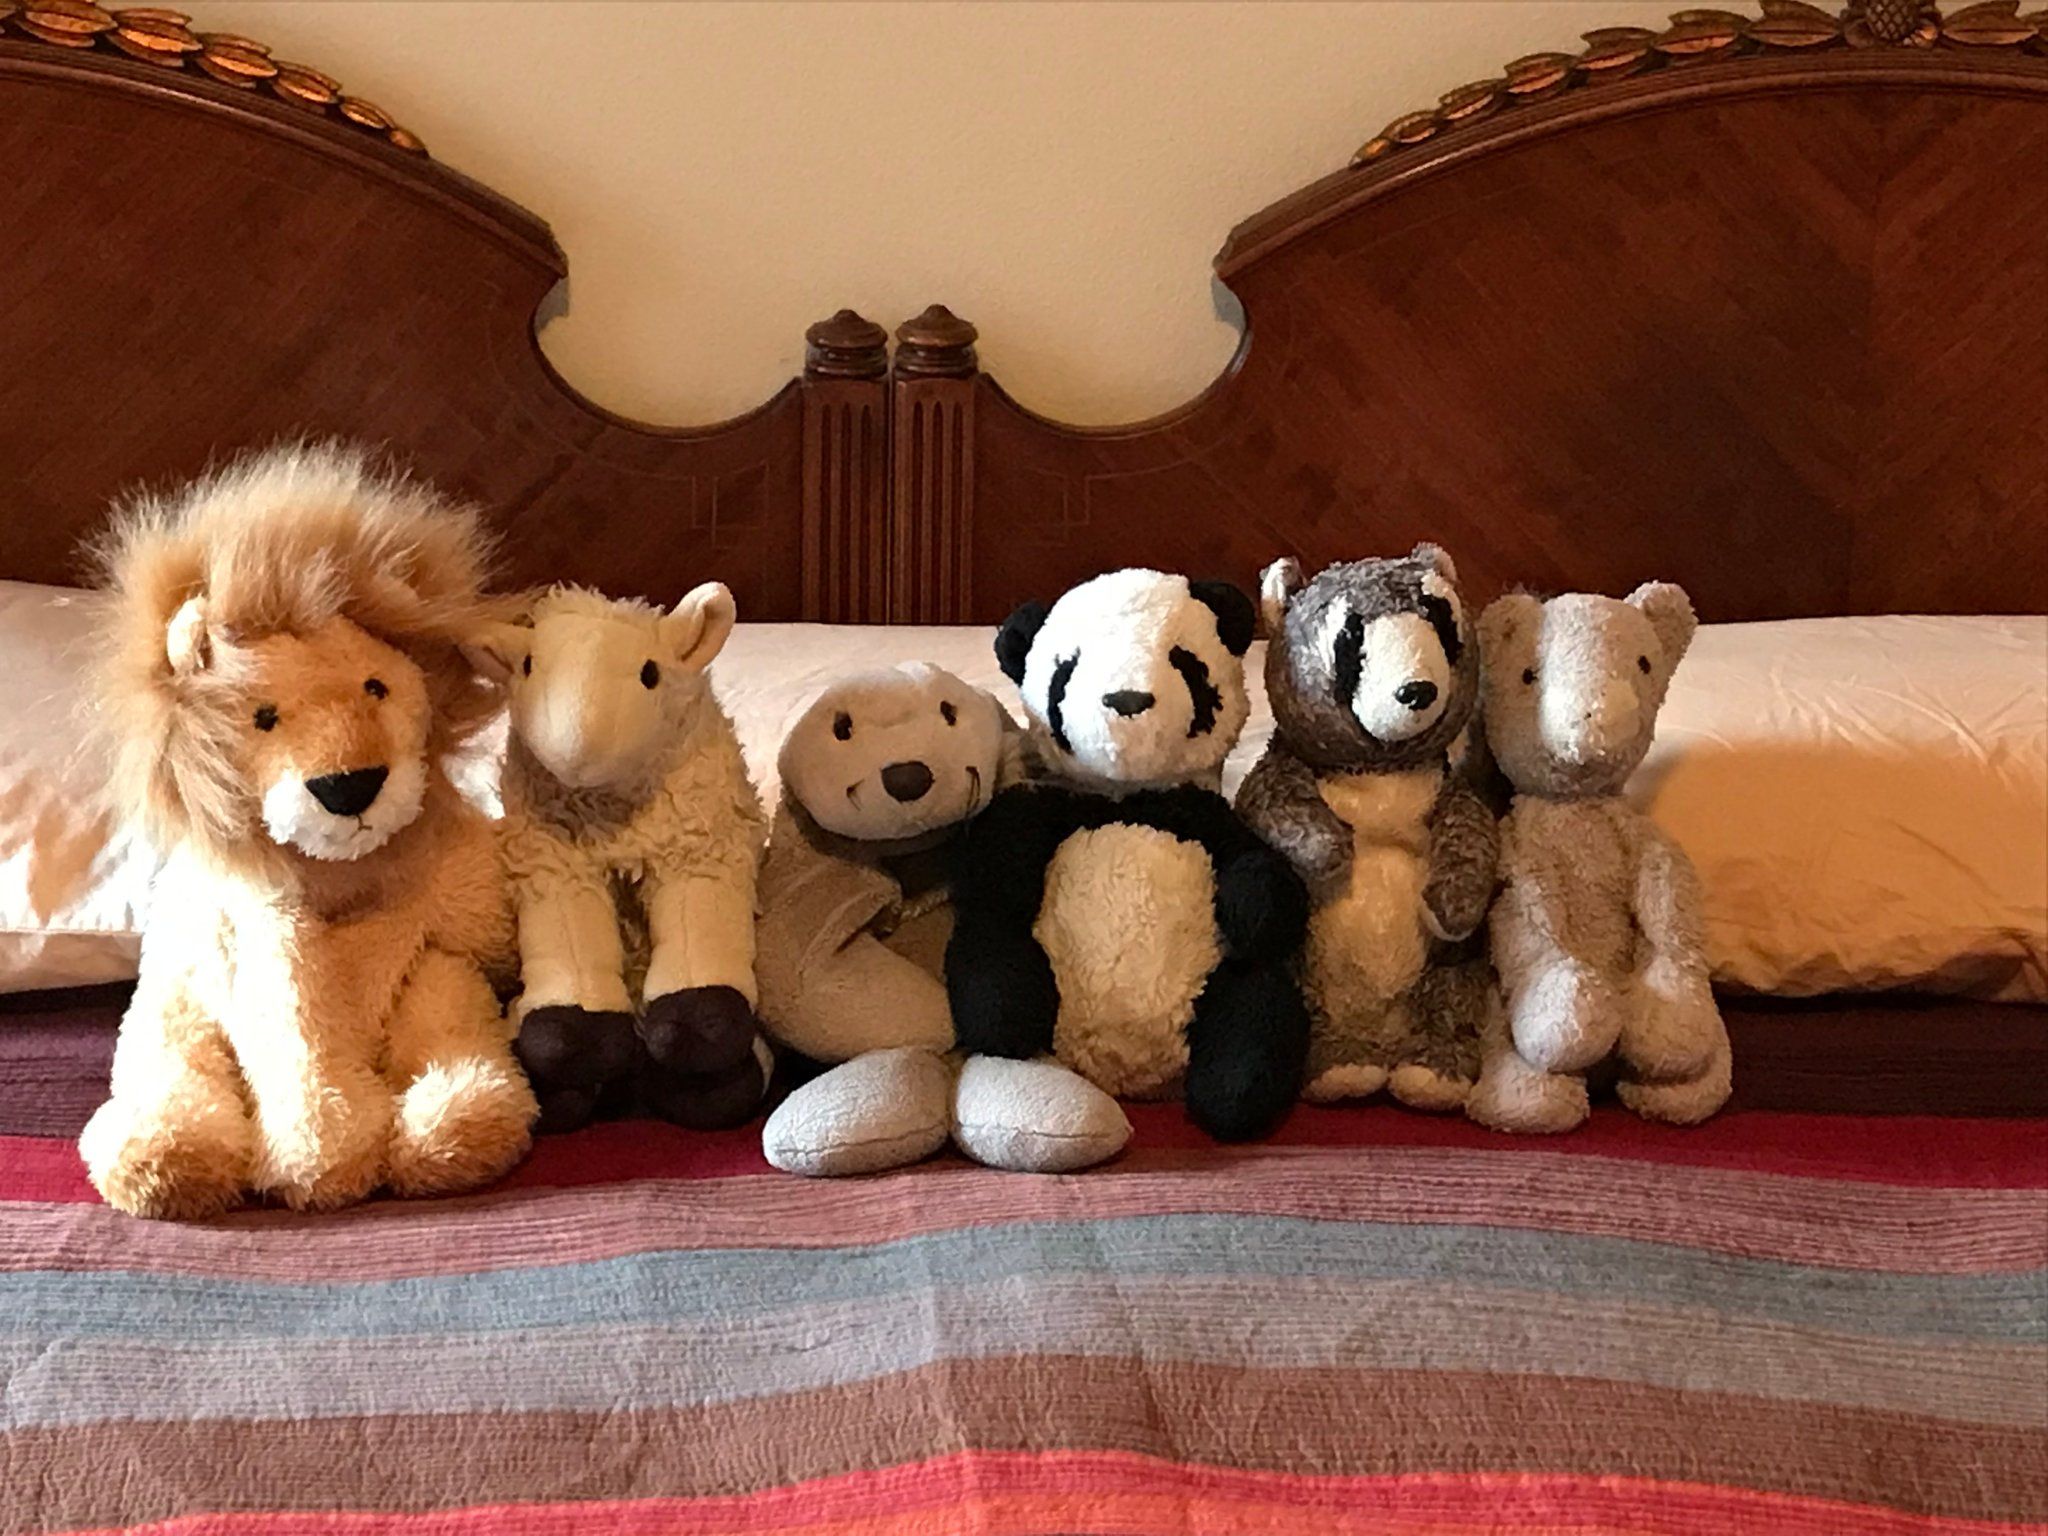 My Best Source of Comfort': Adults With Stuffed Animals Describe